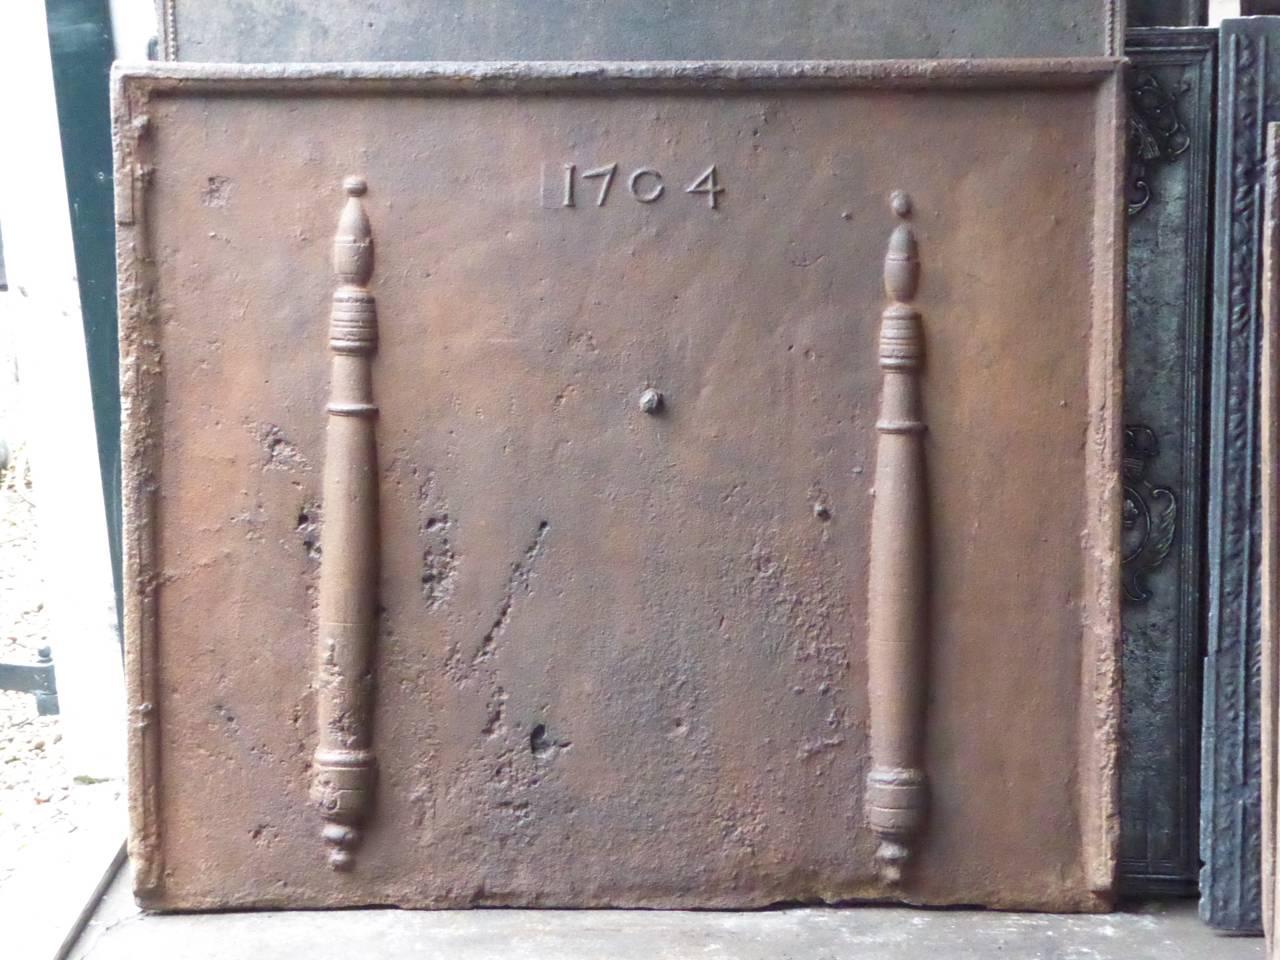 18th century French fireback with the Pillars of Hercules and the date of production 1704.

The pillar refers to the club of Hercules, his favourite weapon. It symbolizes power. Since antiquity the ‘Pillars of Hercules’ are also the name of the